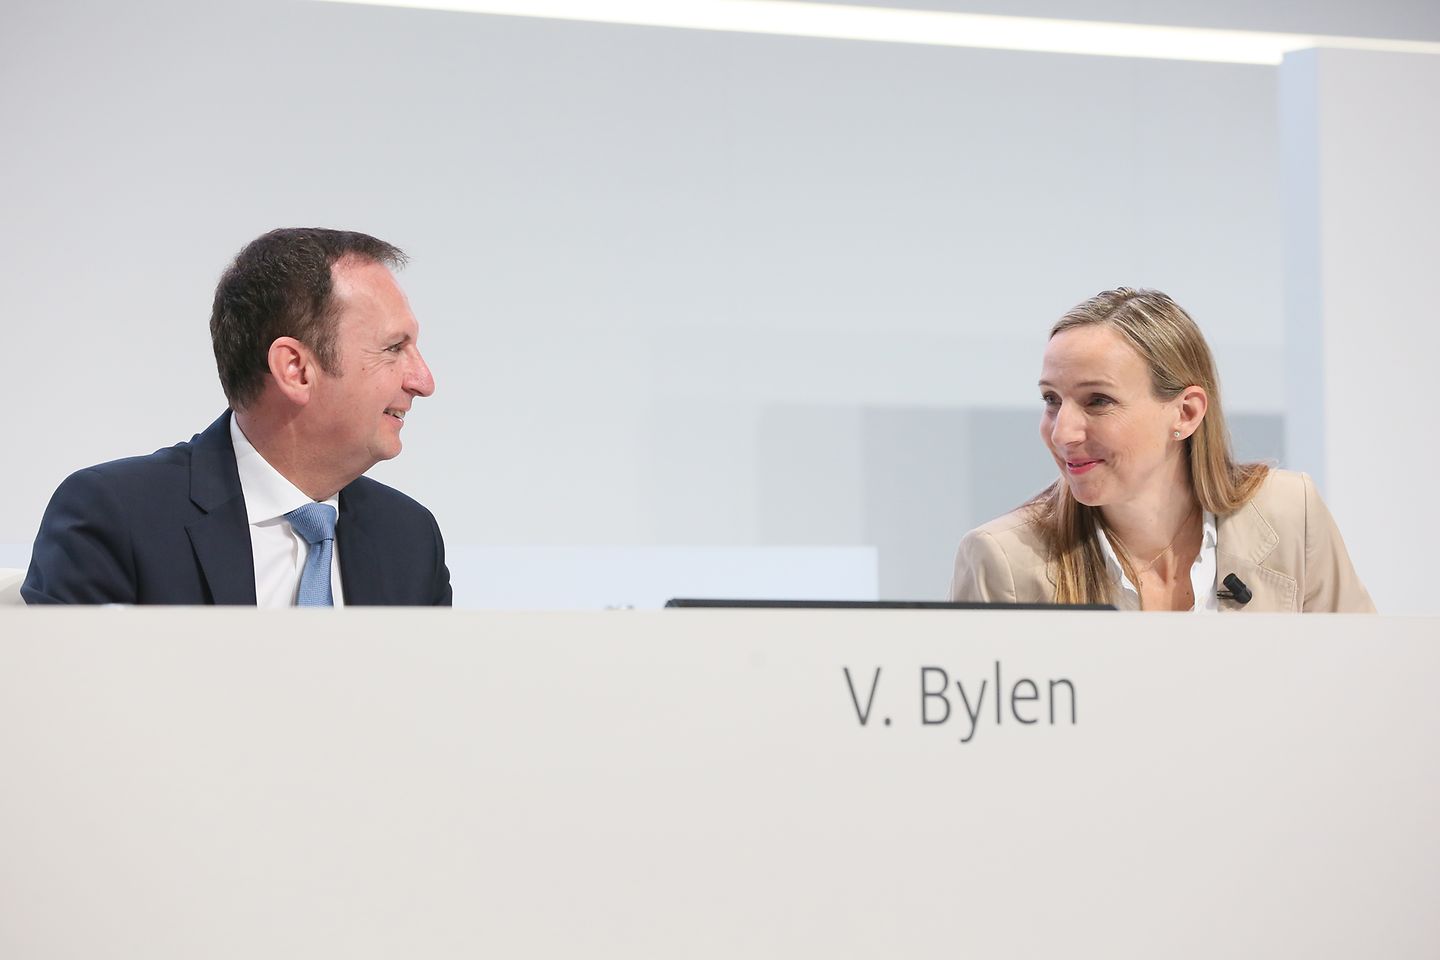 
CEO Hans Van Bylen and Dr. Simone Bagel-Trah, Chairwoman of the Shareholders’ Committee and Supervisory Board